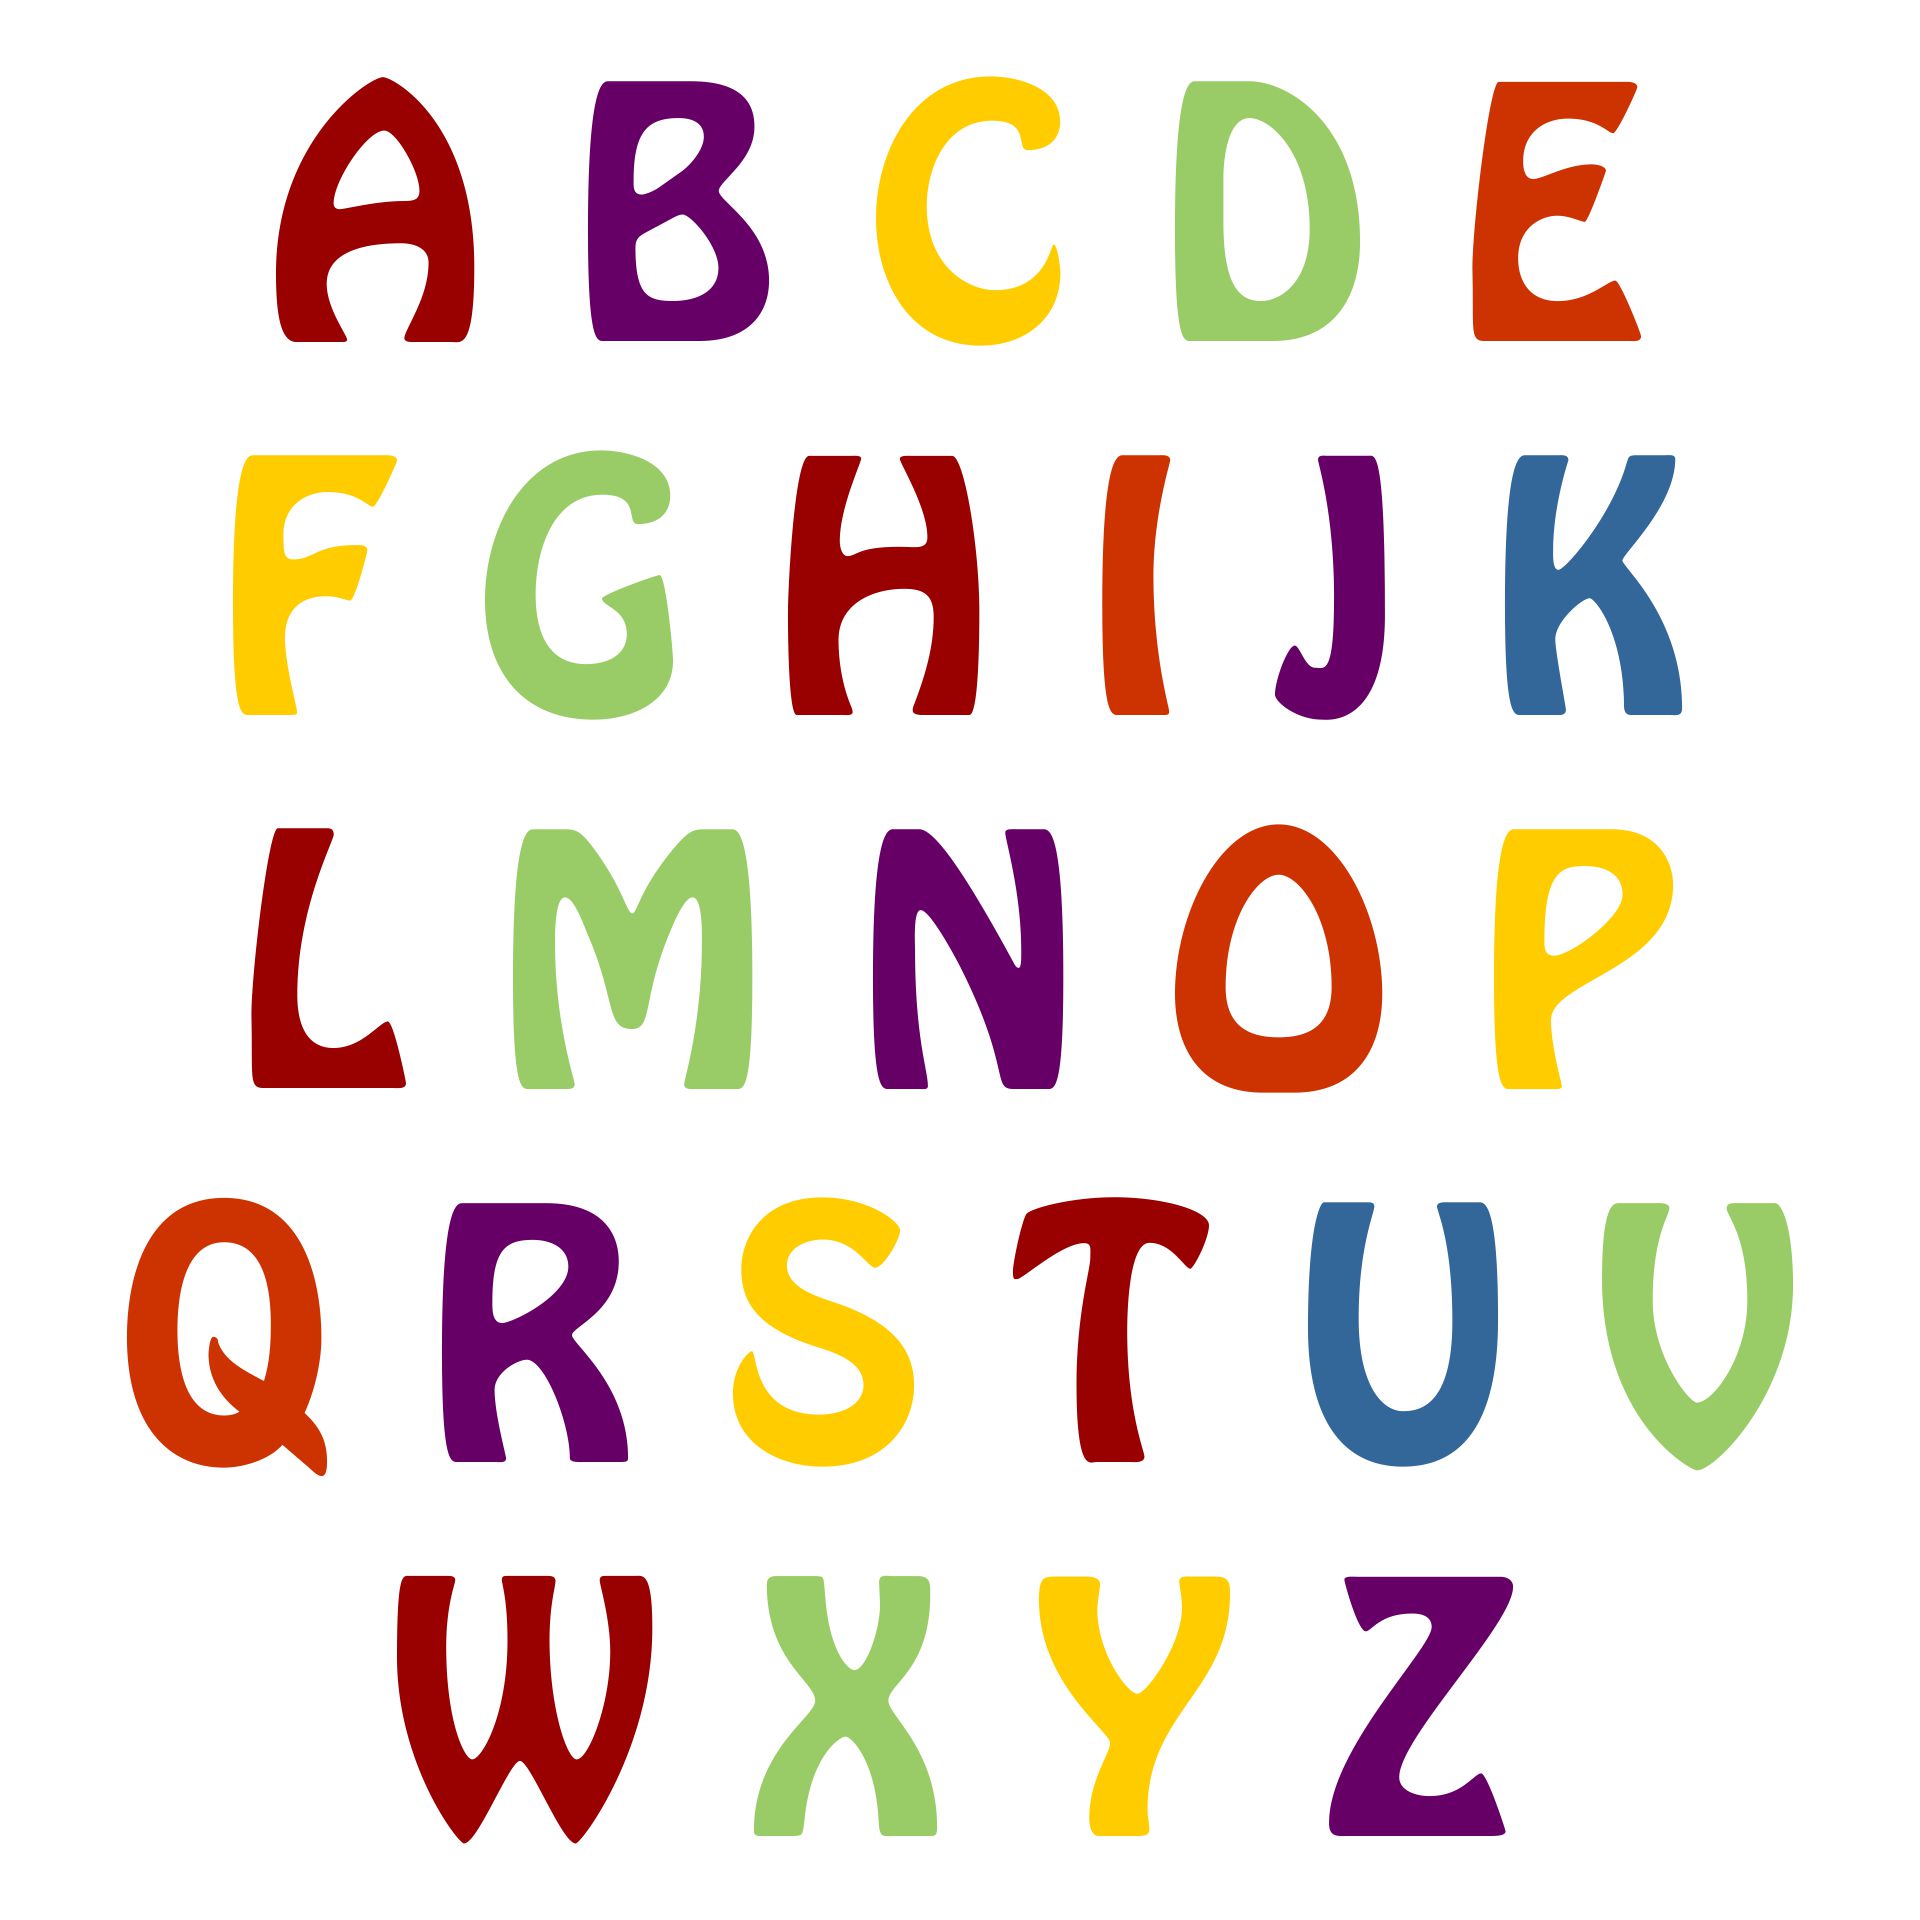 Letter Cut Out Pdf - 7 Best Images of Printable Single Letters ...